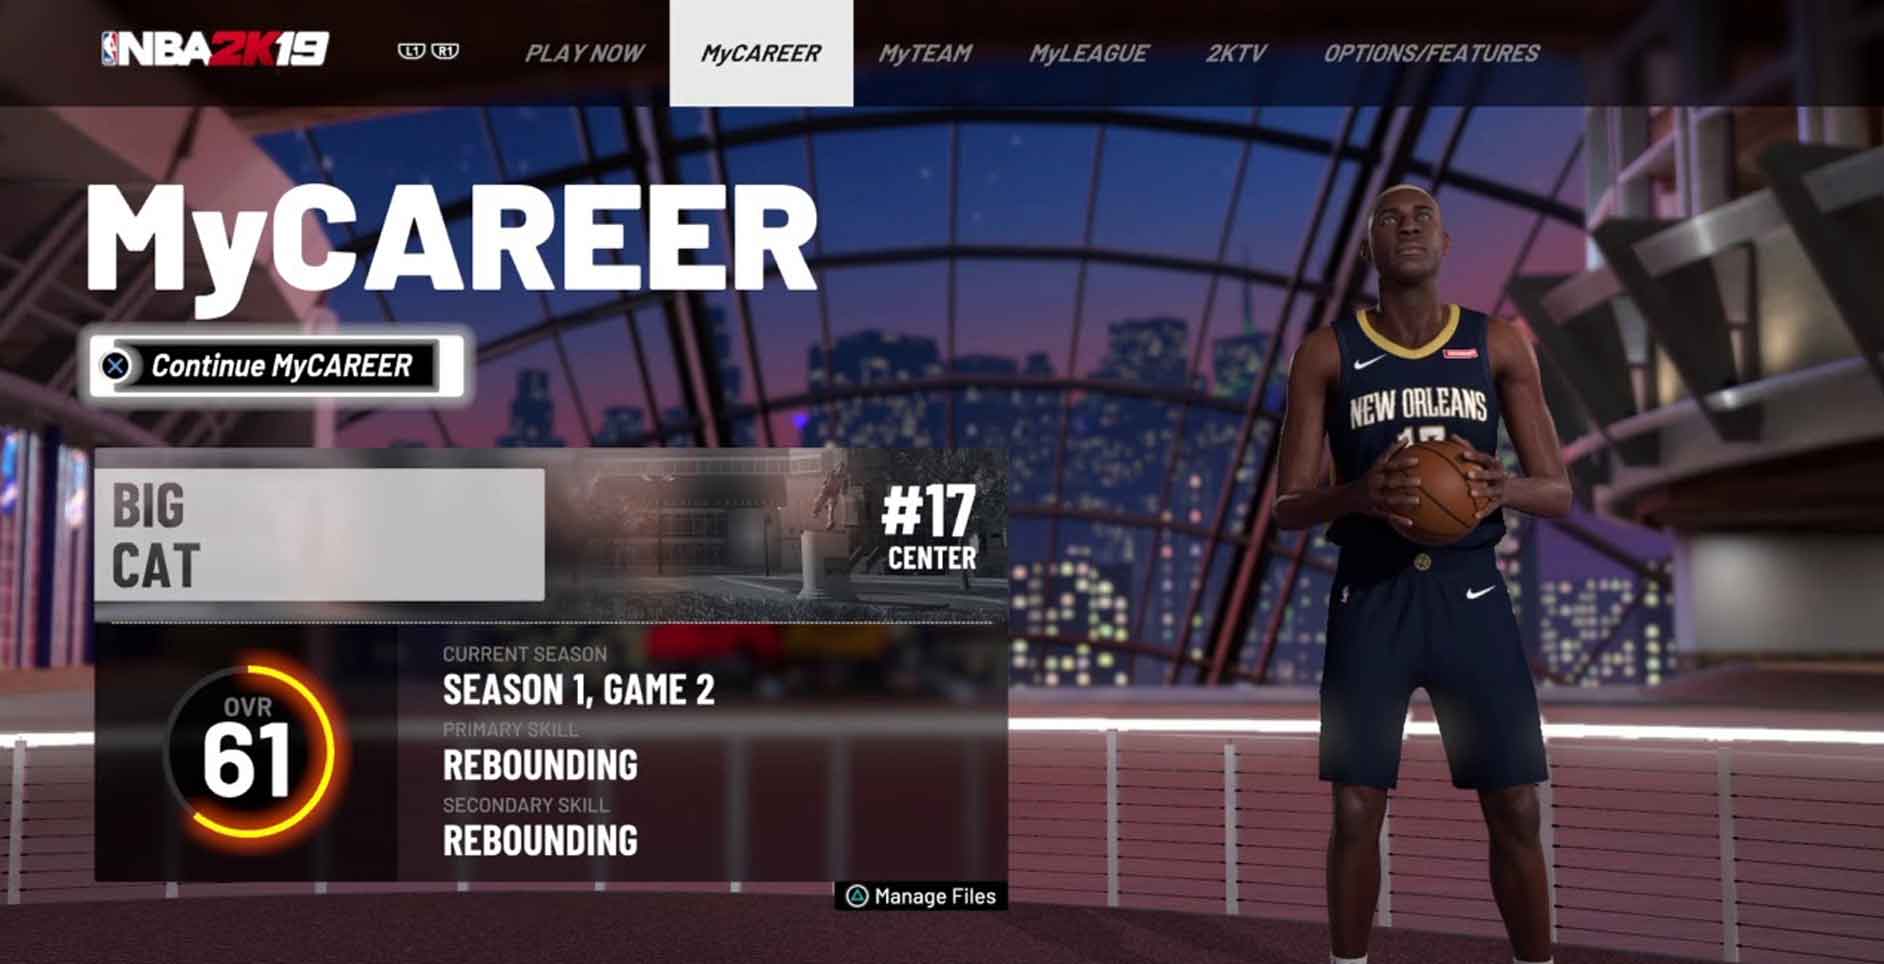 How to Become a Hardwood Legend in 'NBA 2K19' MyCareer Mode